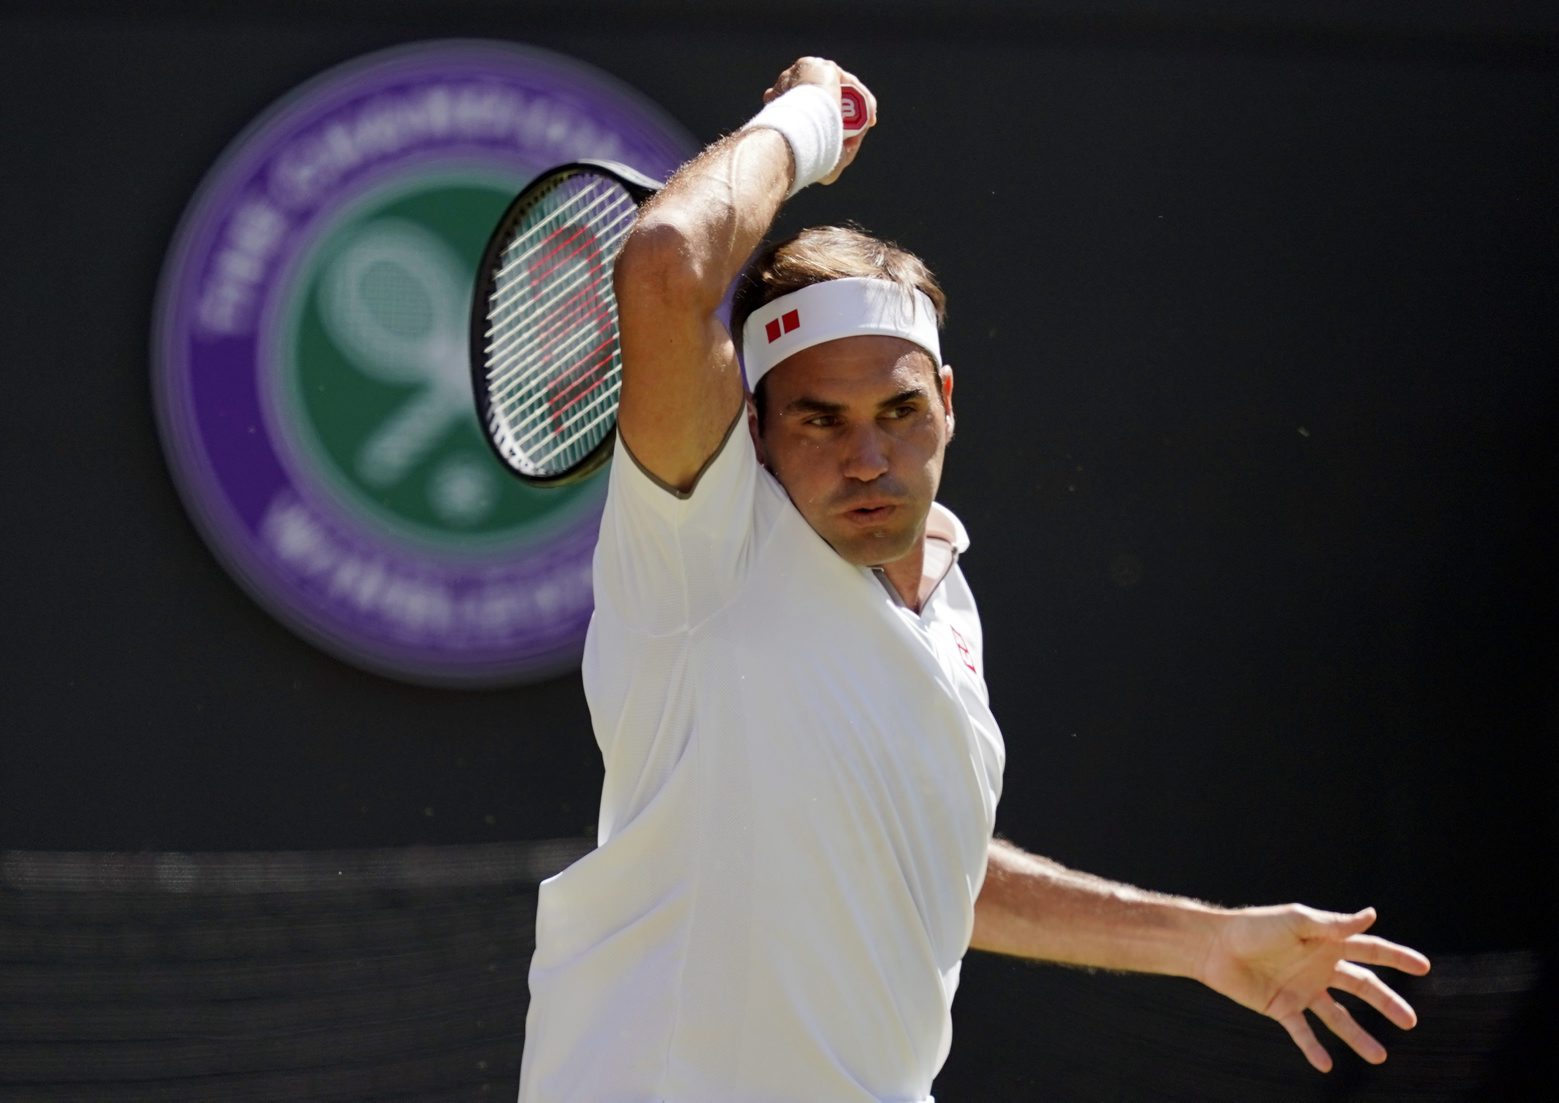 epa07694791 Roger Federer of Switzerland returns to Jay Clarke of Britain in their second round match during the Wimbledon Championships at the All England Lawn Tennis Club, in London, Britain, 04 July 2019. EPA/WILL OLIVER EDITORIAL USE ONLY/NO COMMERCIAL SALES BRITAIN TENNIS WIMBLEDON 2019 GRAND SLAM